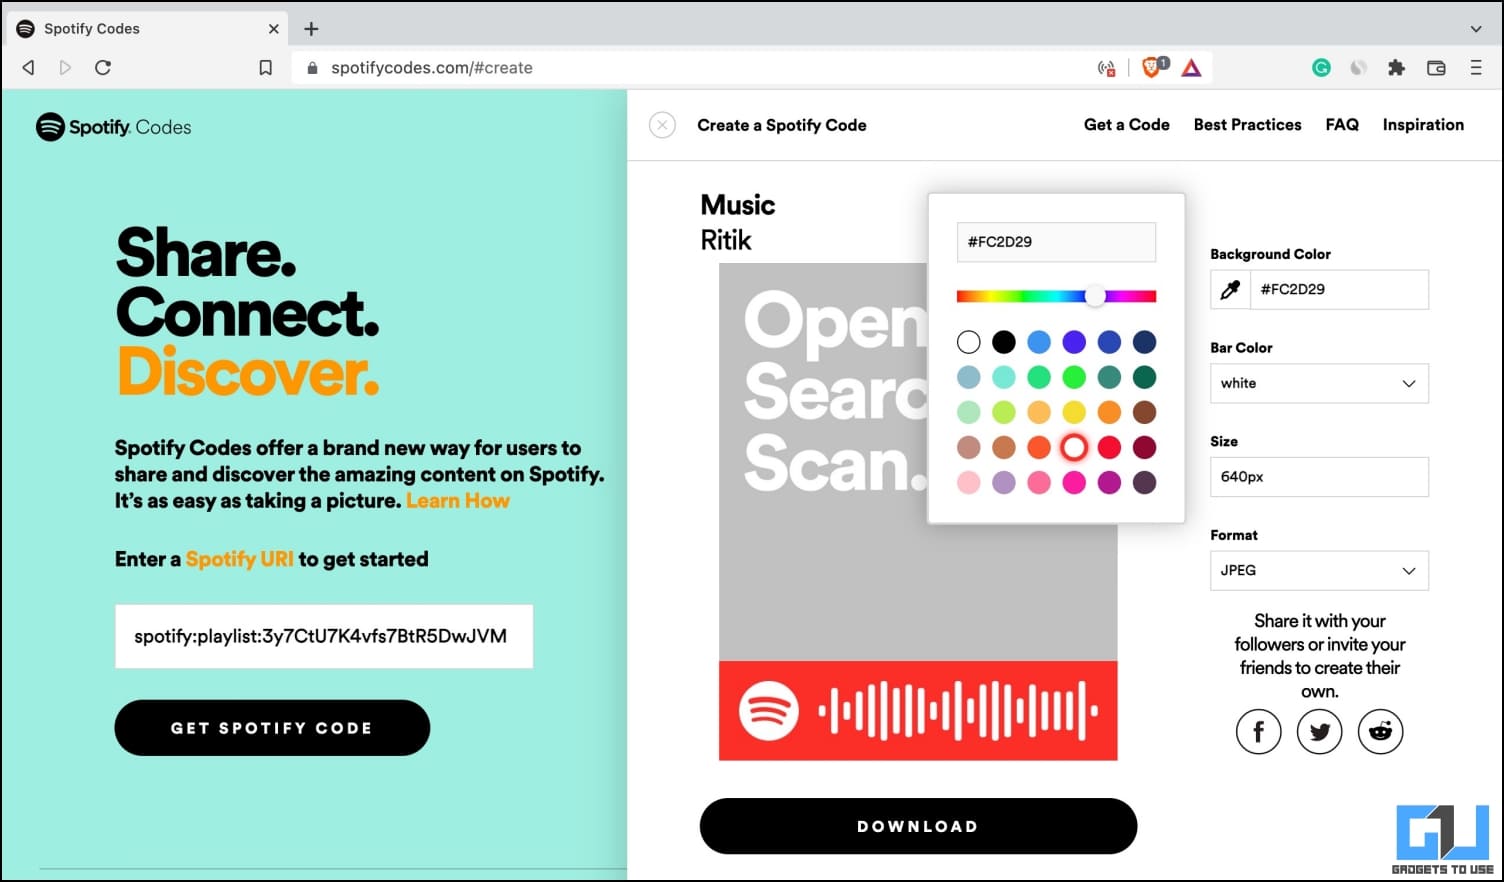 Customize Spotify Code Color